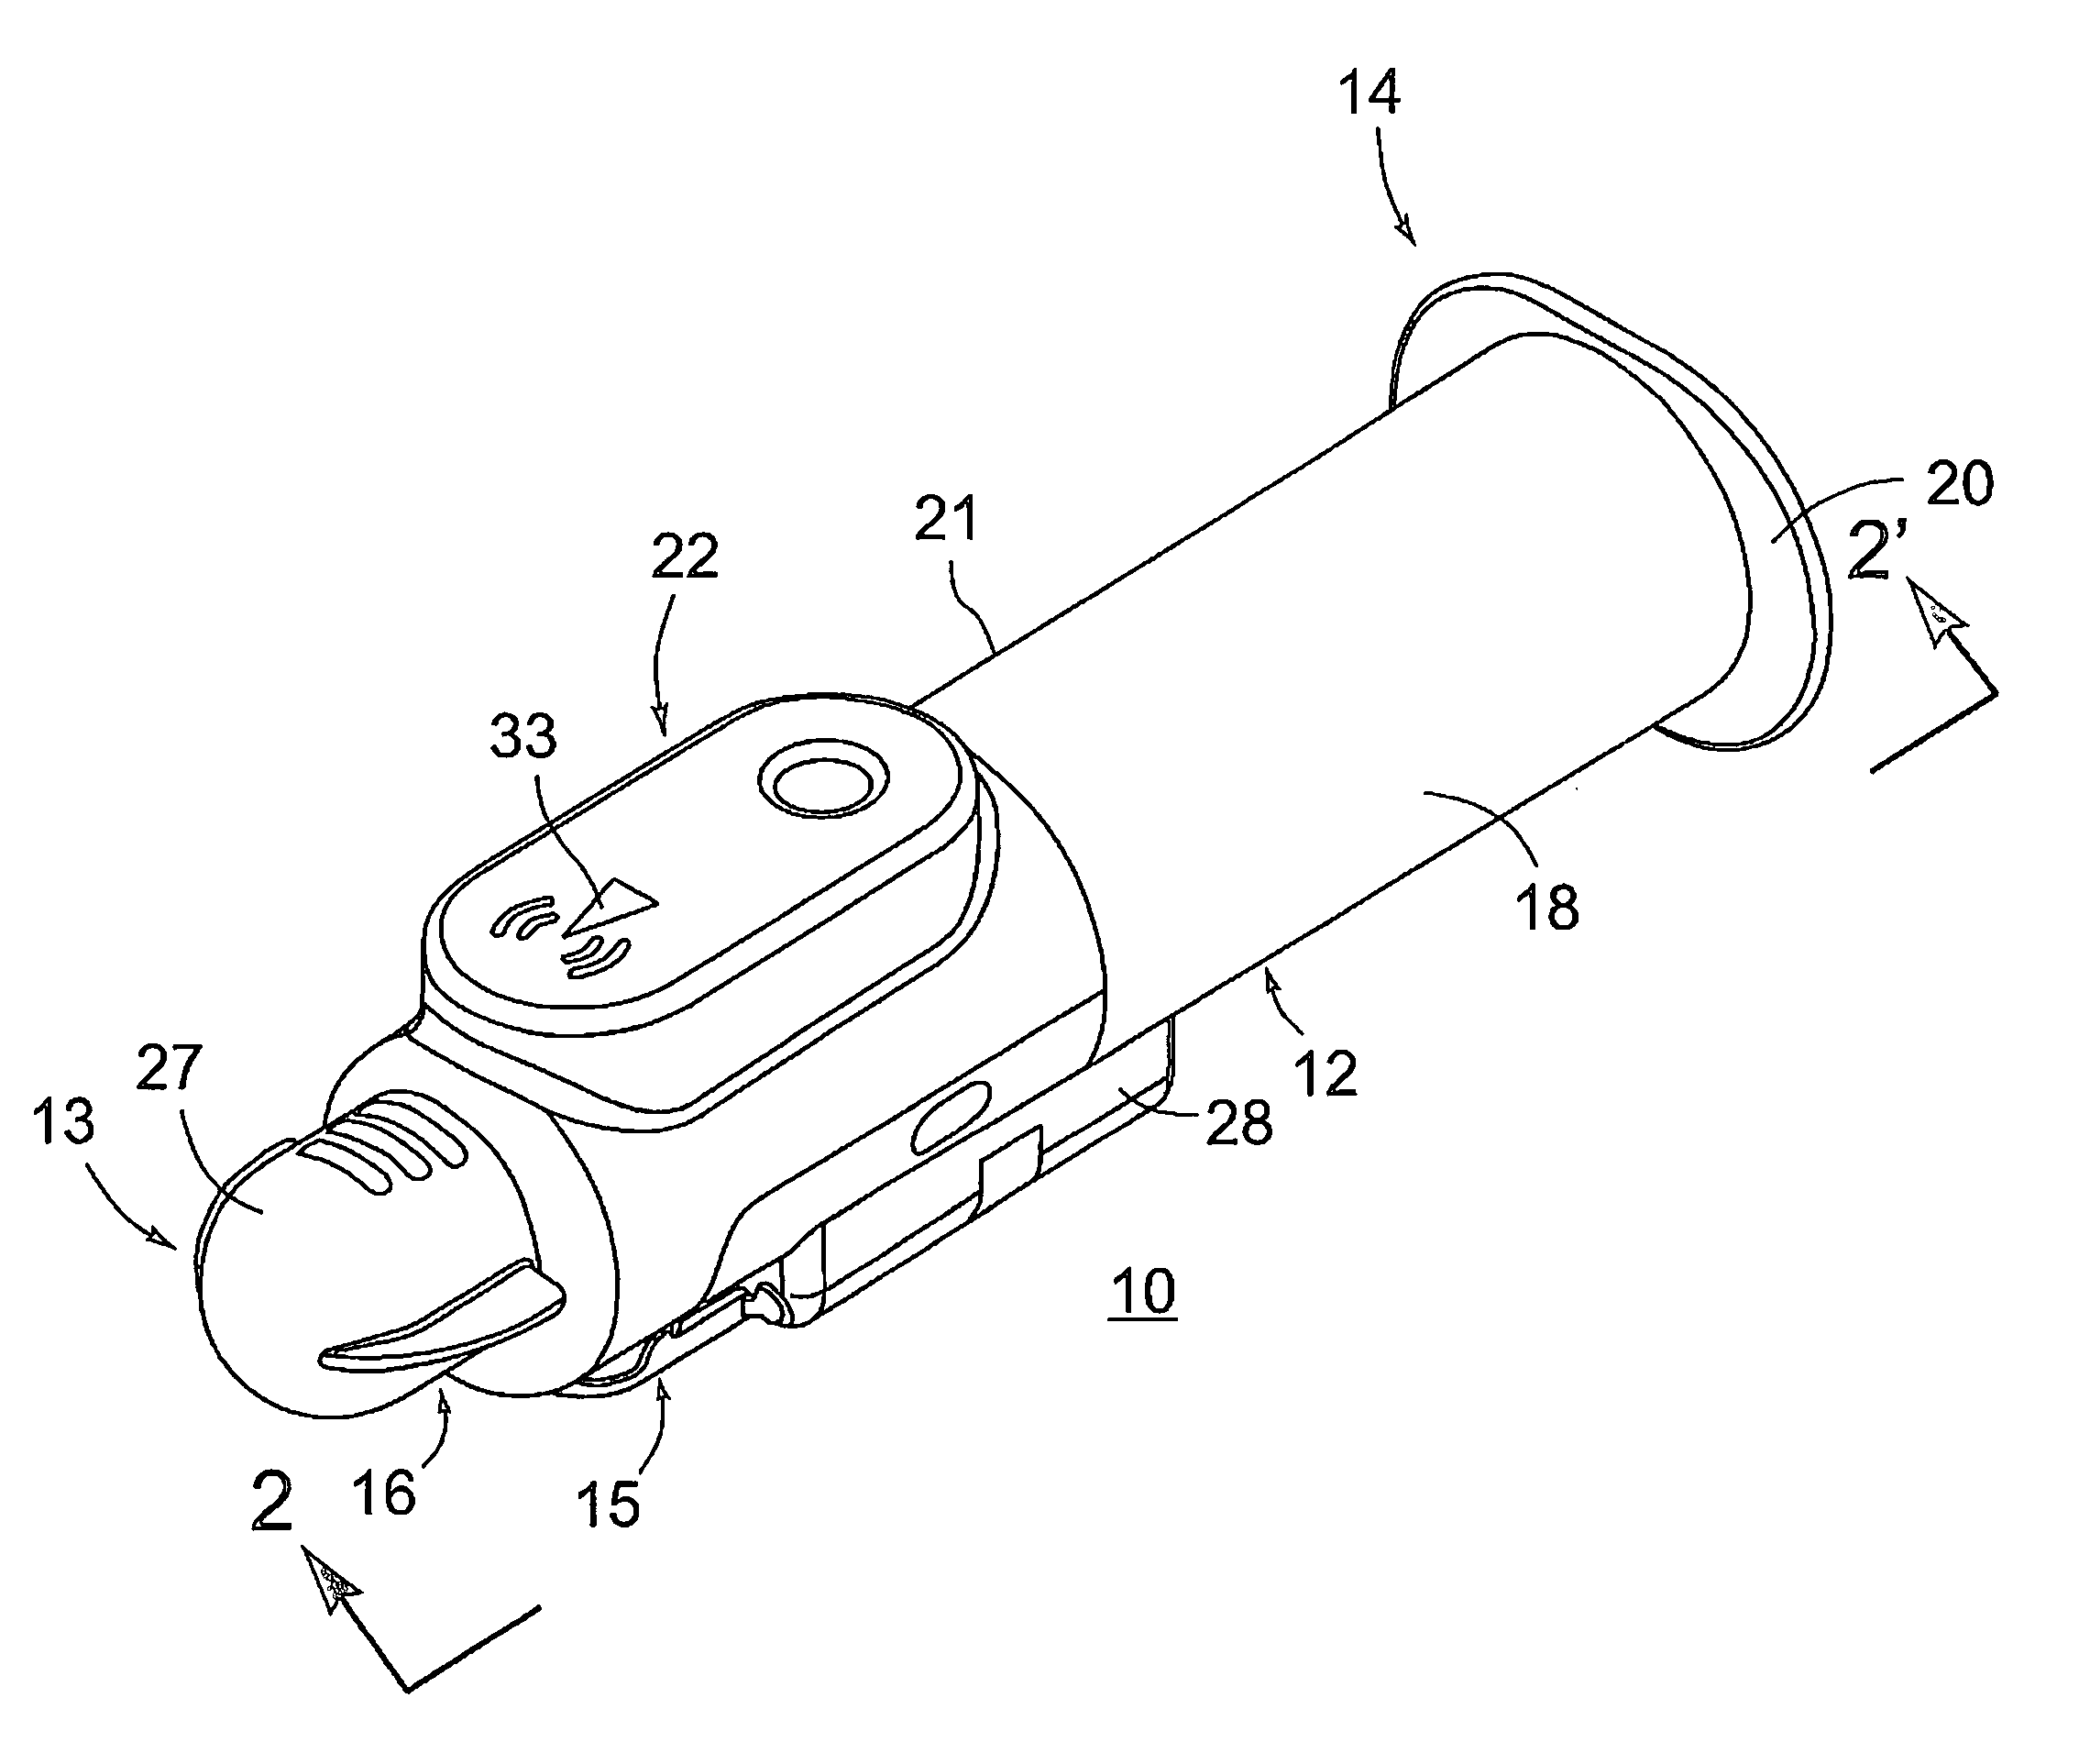 Material dispenser with a control valve